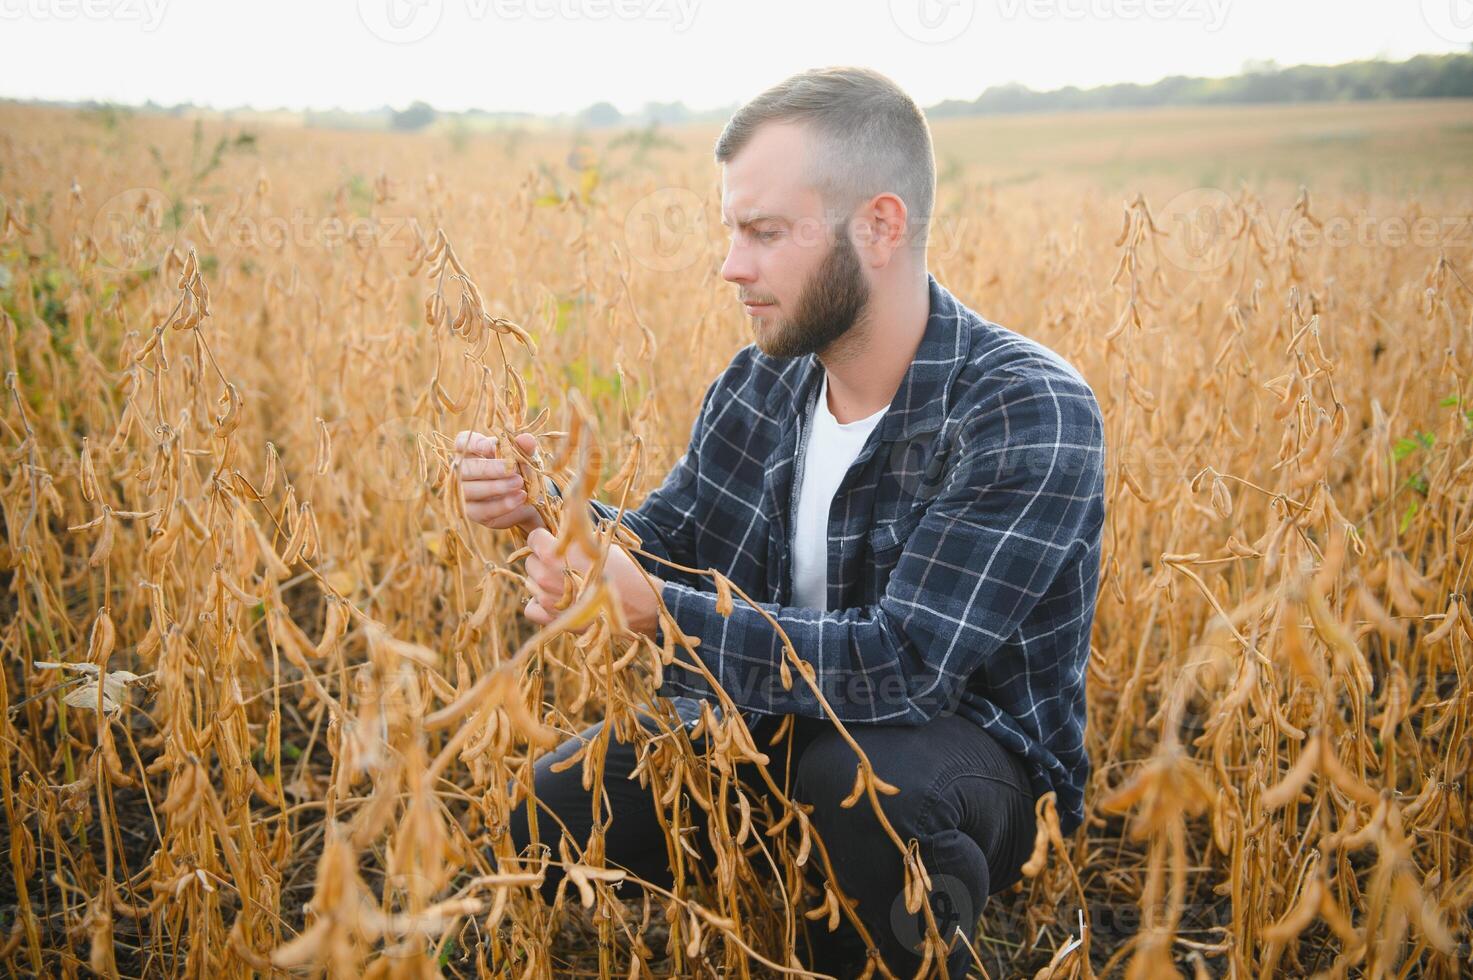 armer inspects soybeans before harvesting. The concept of agricultural industry photo